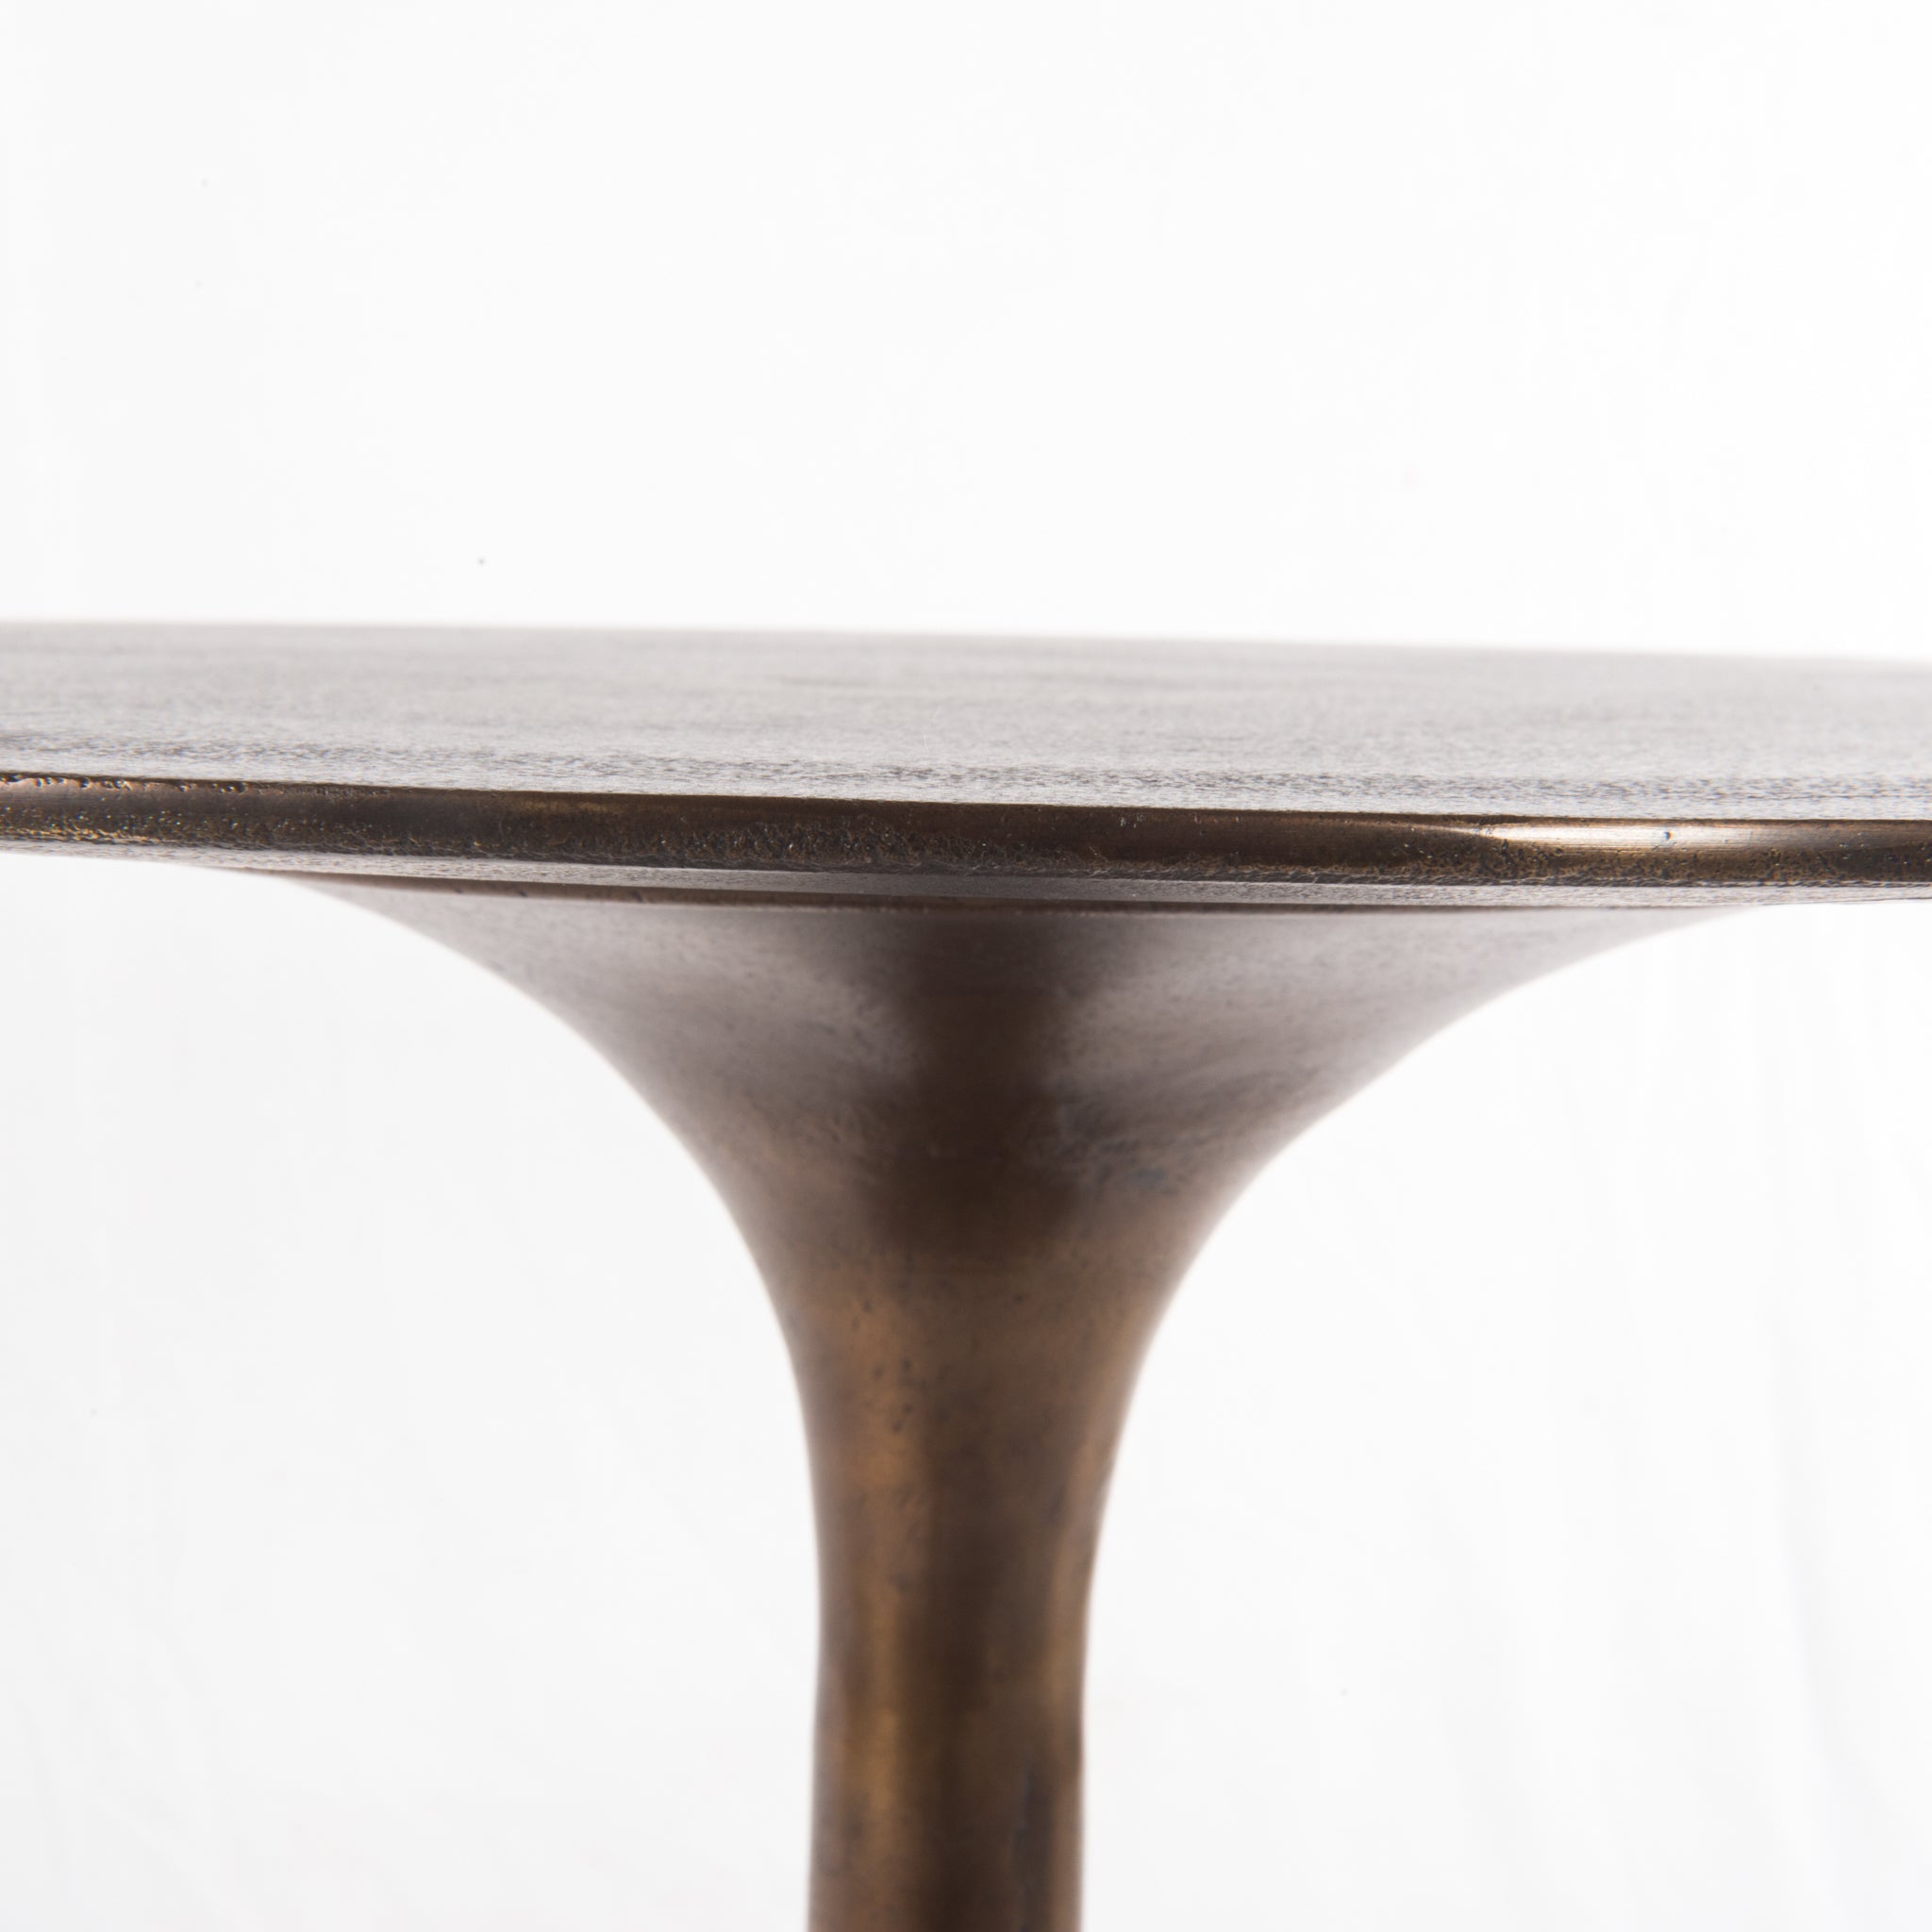 Classic tulip shaping in textural cast-aluminum makes for a modern side table. Finished in antique rust to bring out alluring highs and lows. Great indoors or out — cover or store indoors during inclement weather and when not in use.  Overall Size: 20.00"w x 20.00"d x 23.50"h